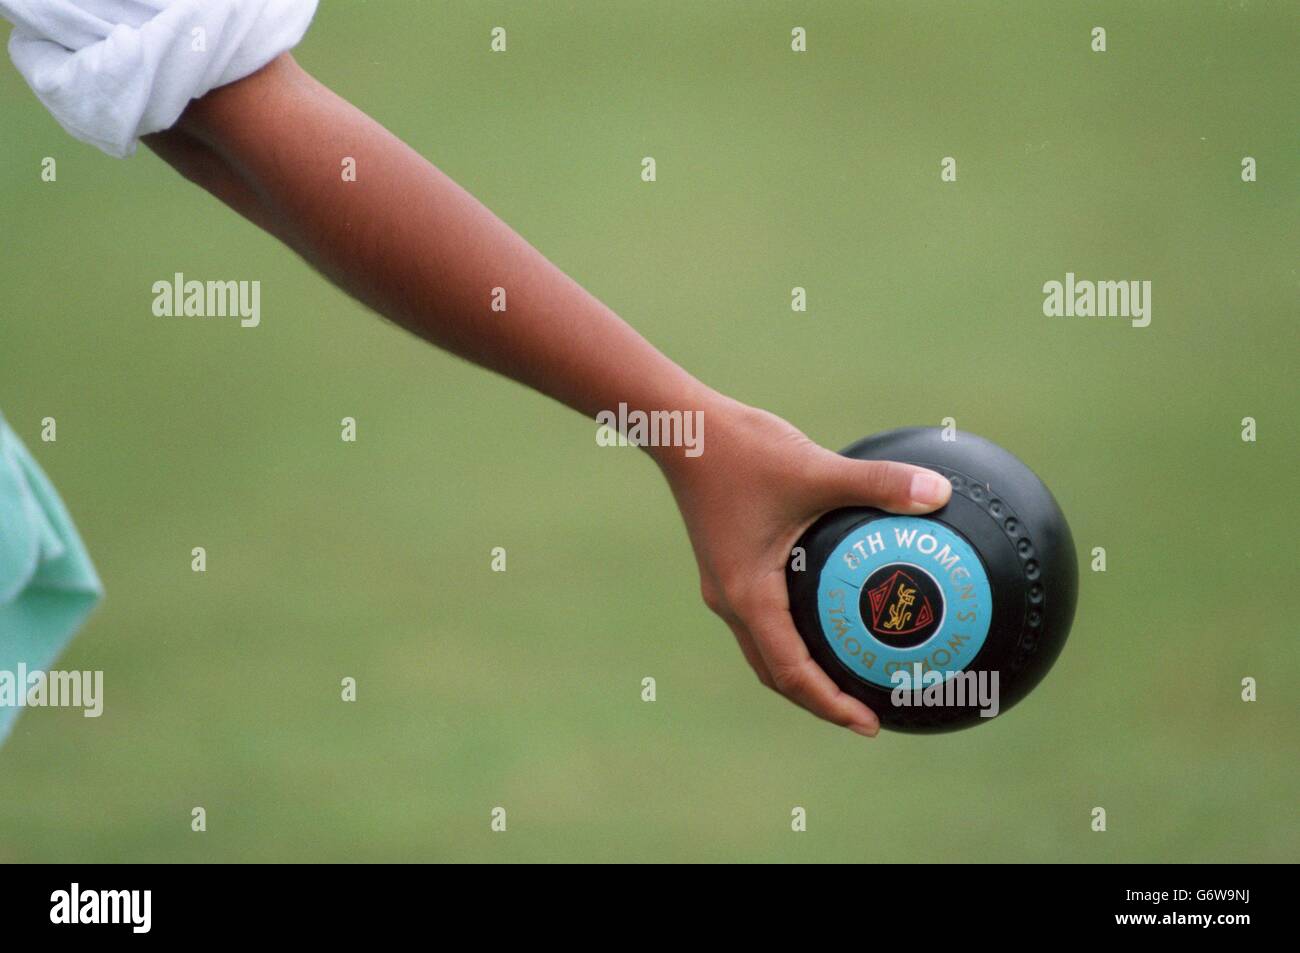 09-AUG-96, Womens World Bowl Championships, A competitor takes aim just before bowling Stock Photo